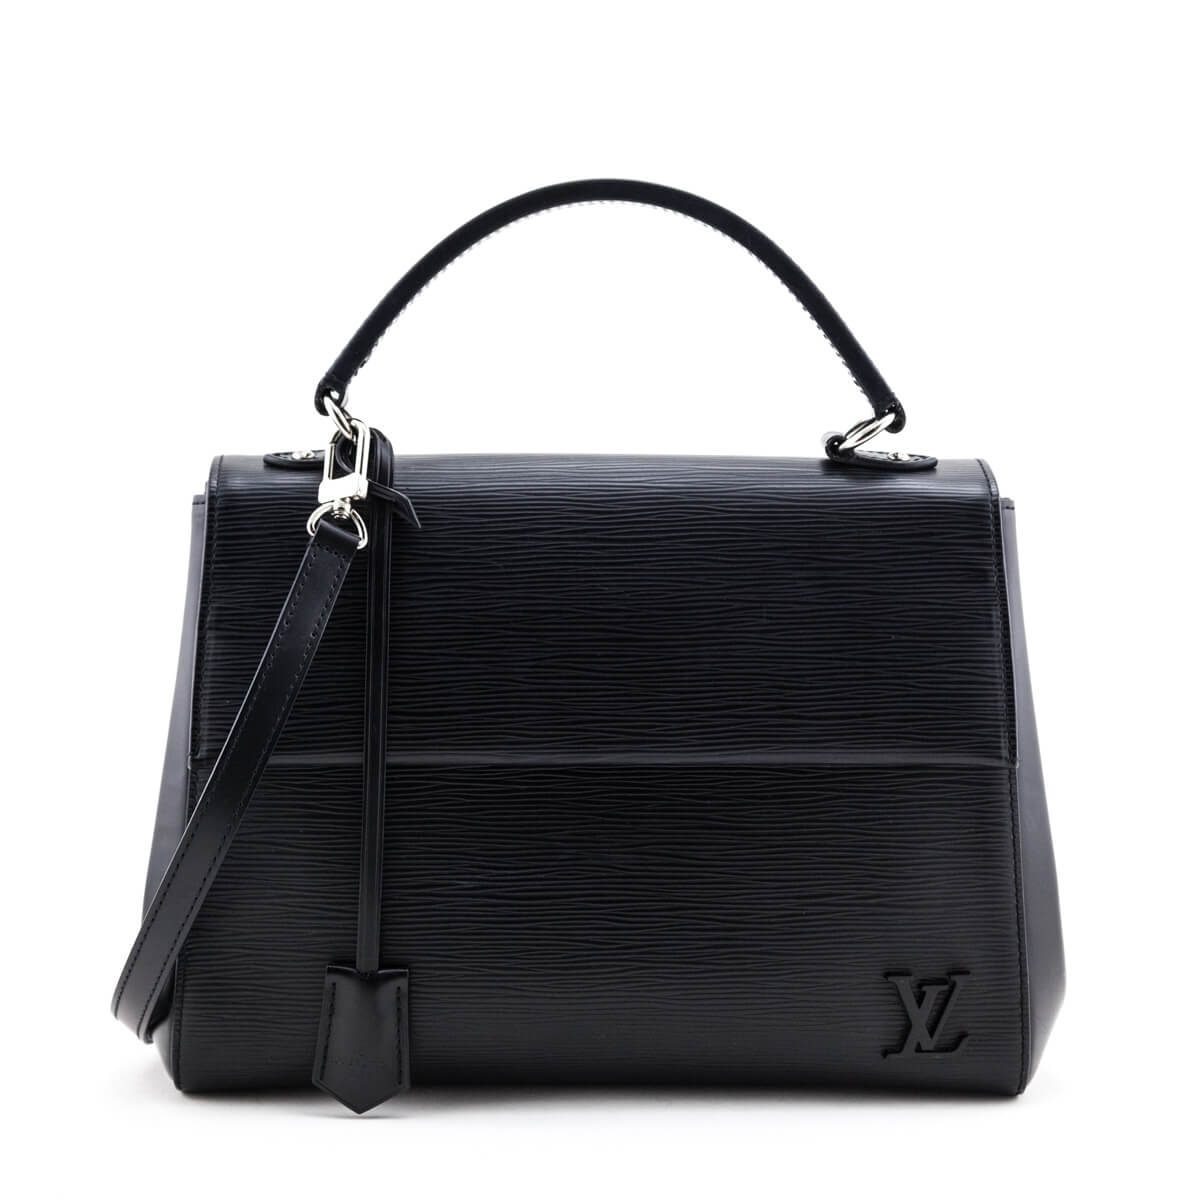 Cluny leather handbag Louis Vuitton Black in Leather - 36630045